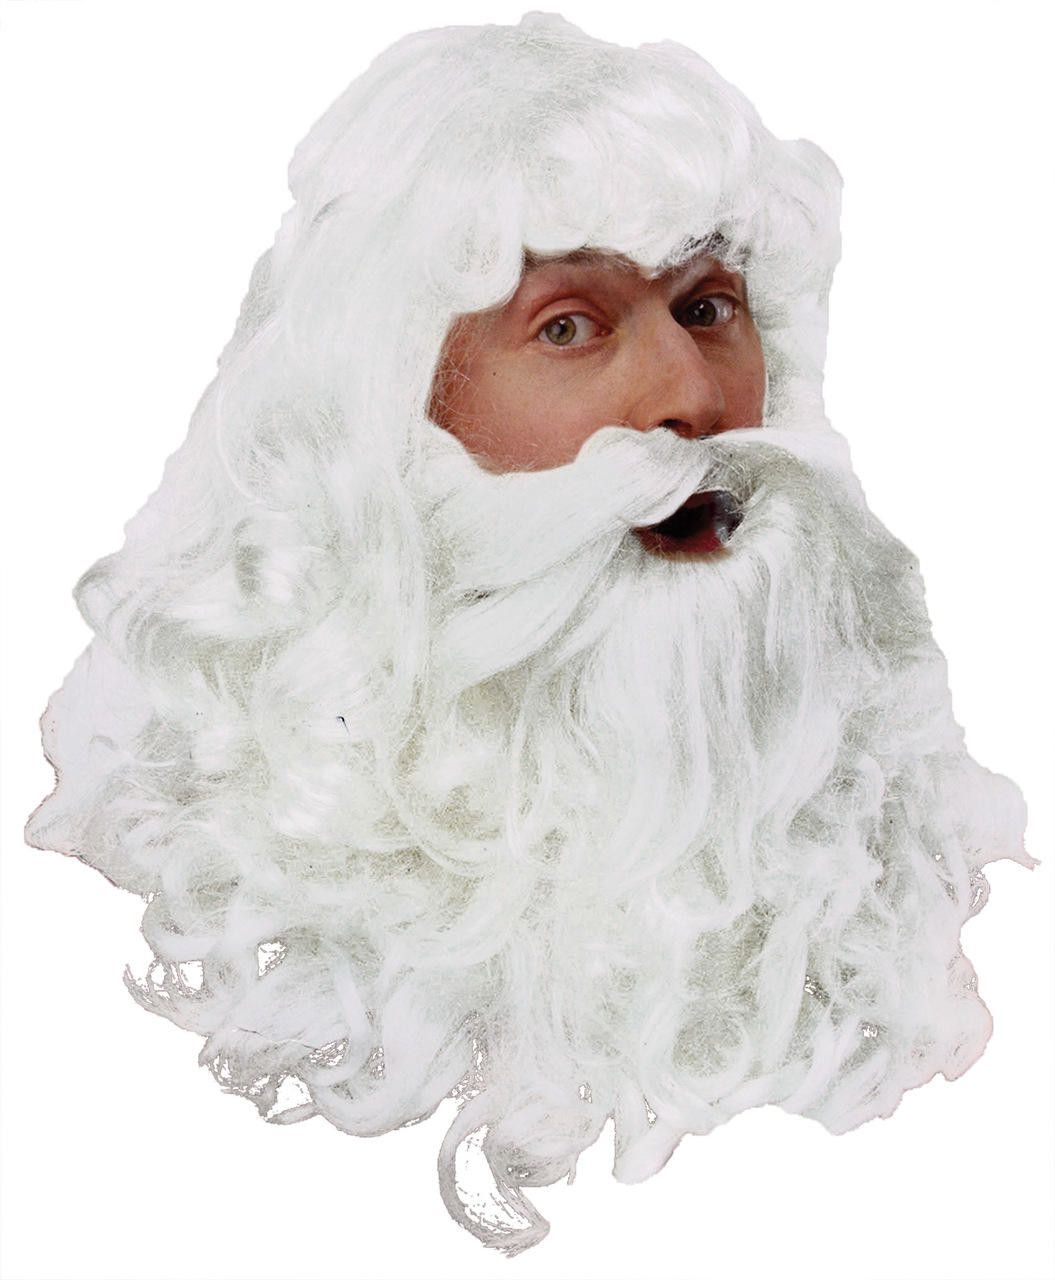 Care Kit for Santa Beards and Wigs